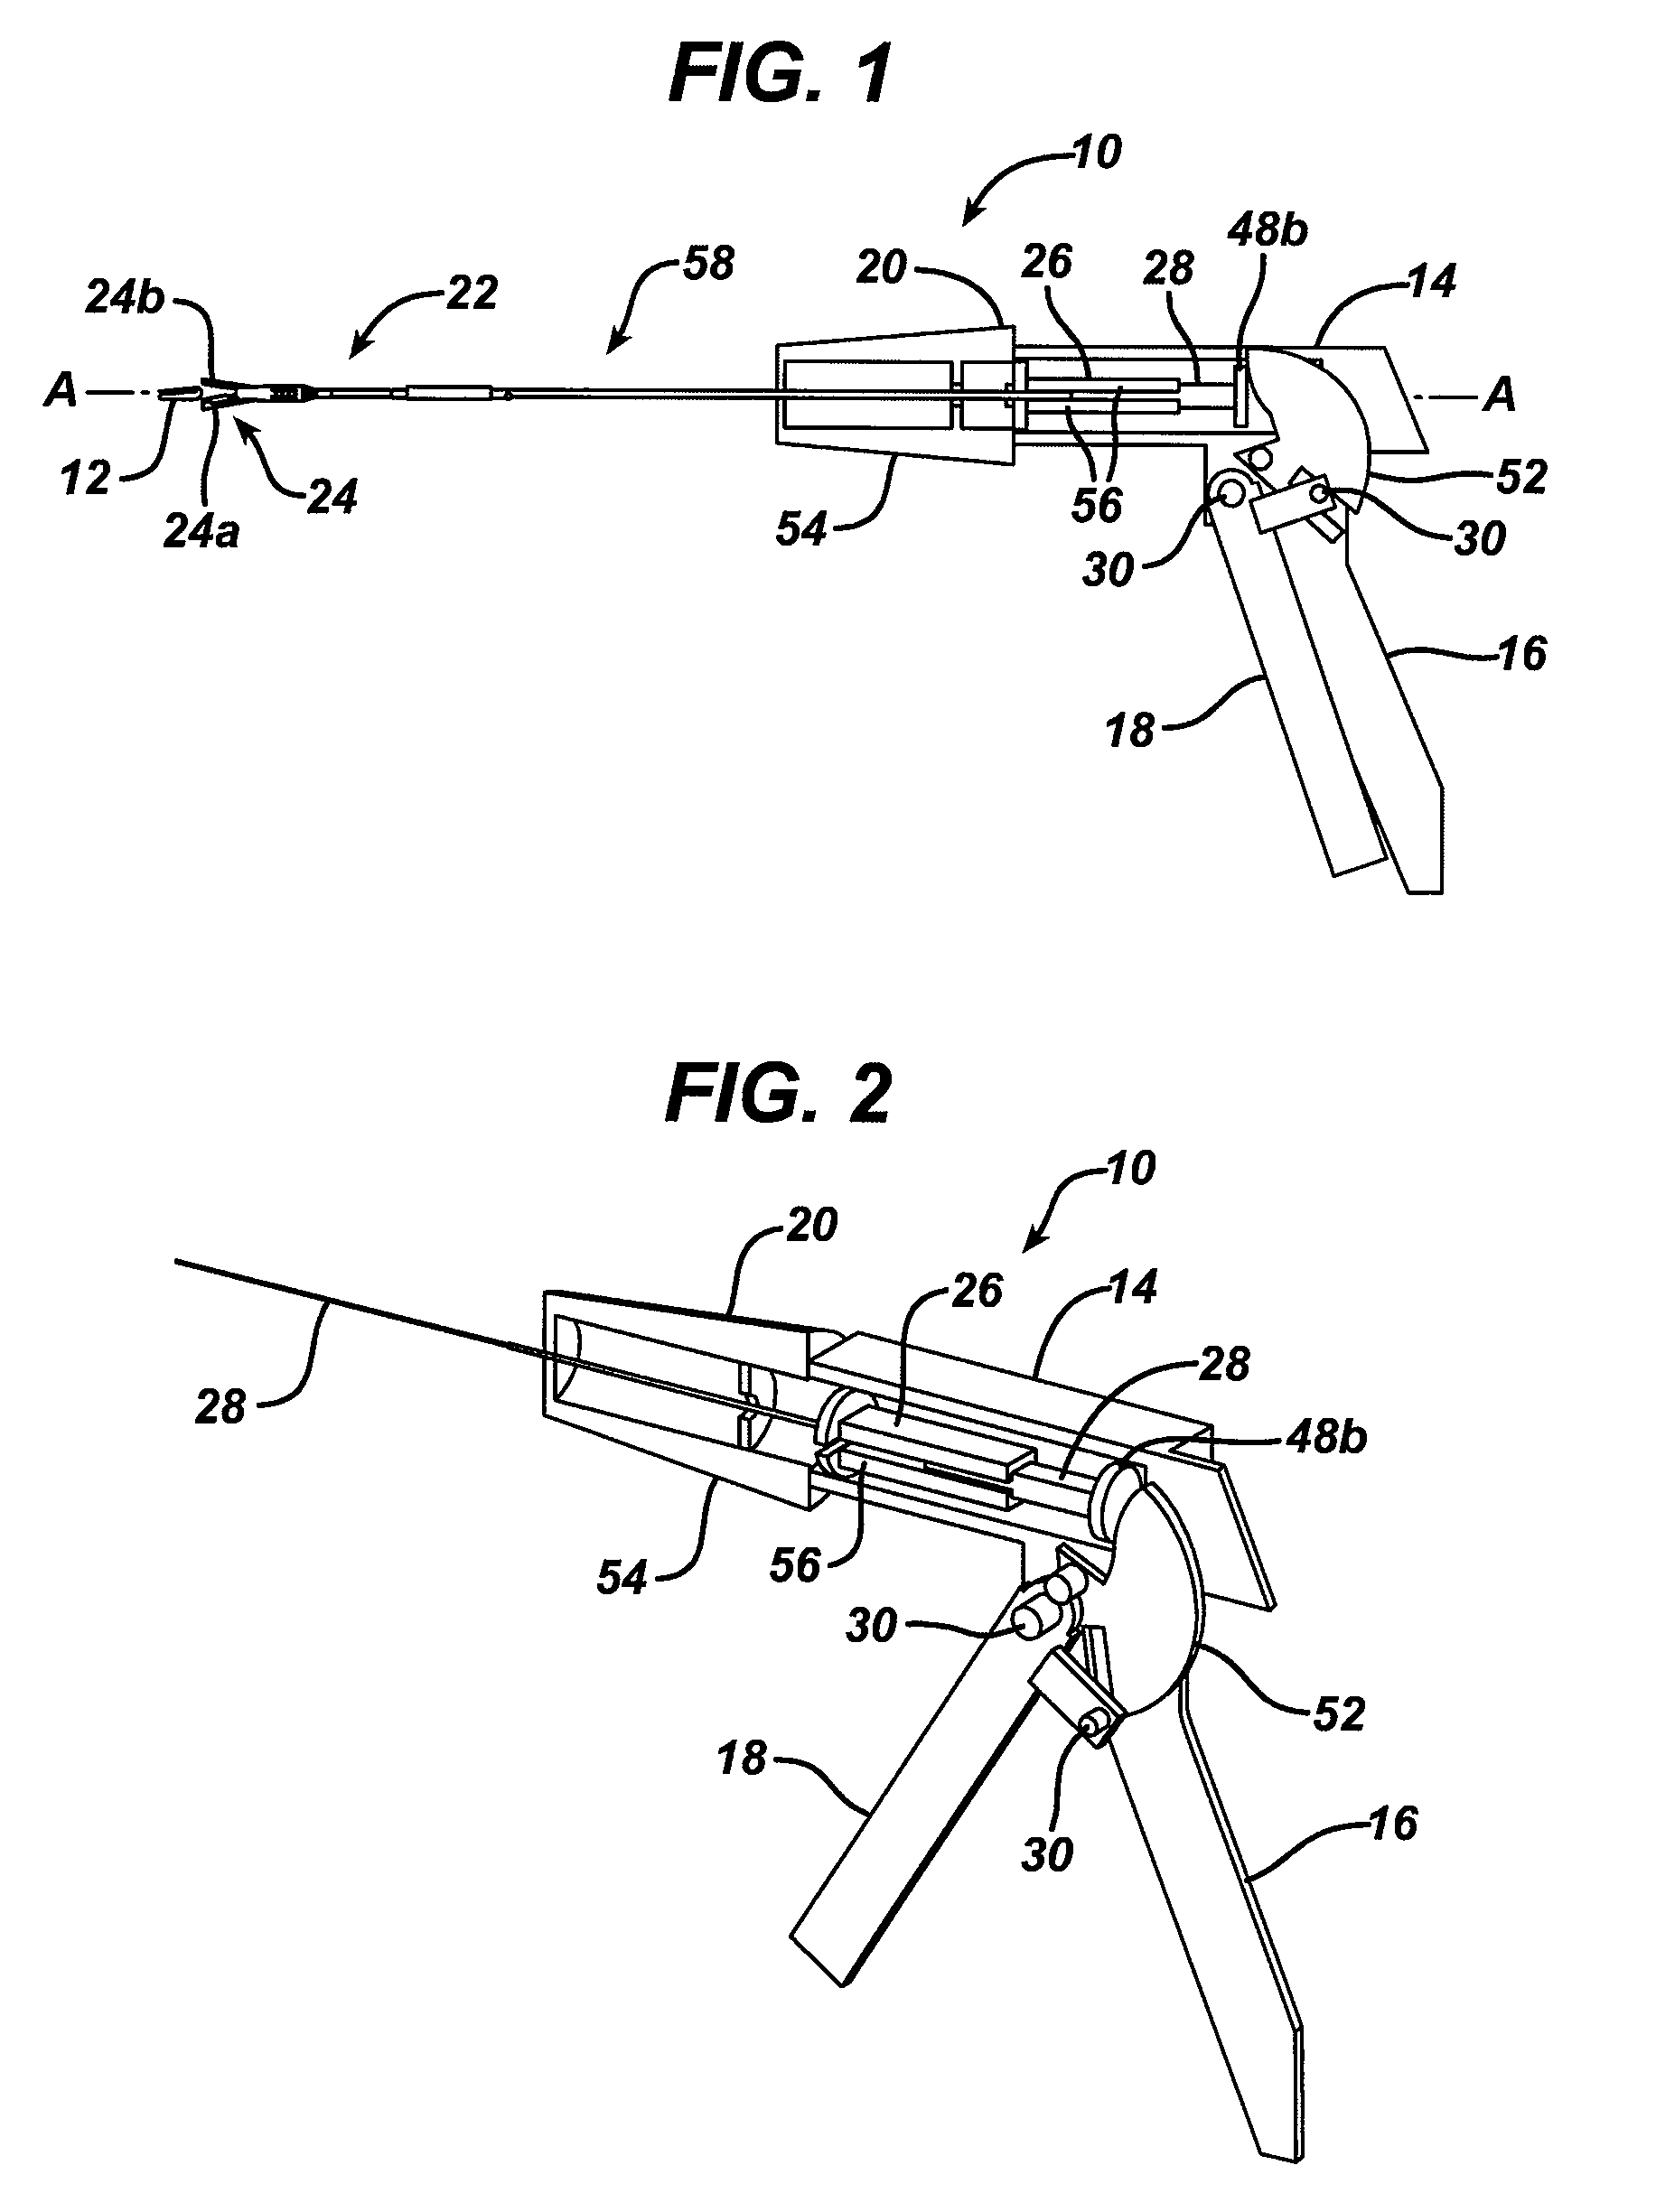 Devices and methods for placing occlusion fasteners